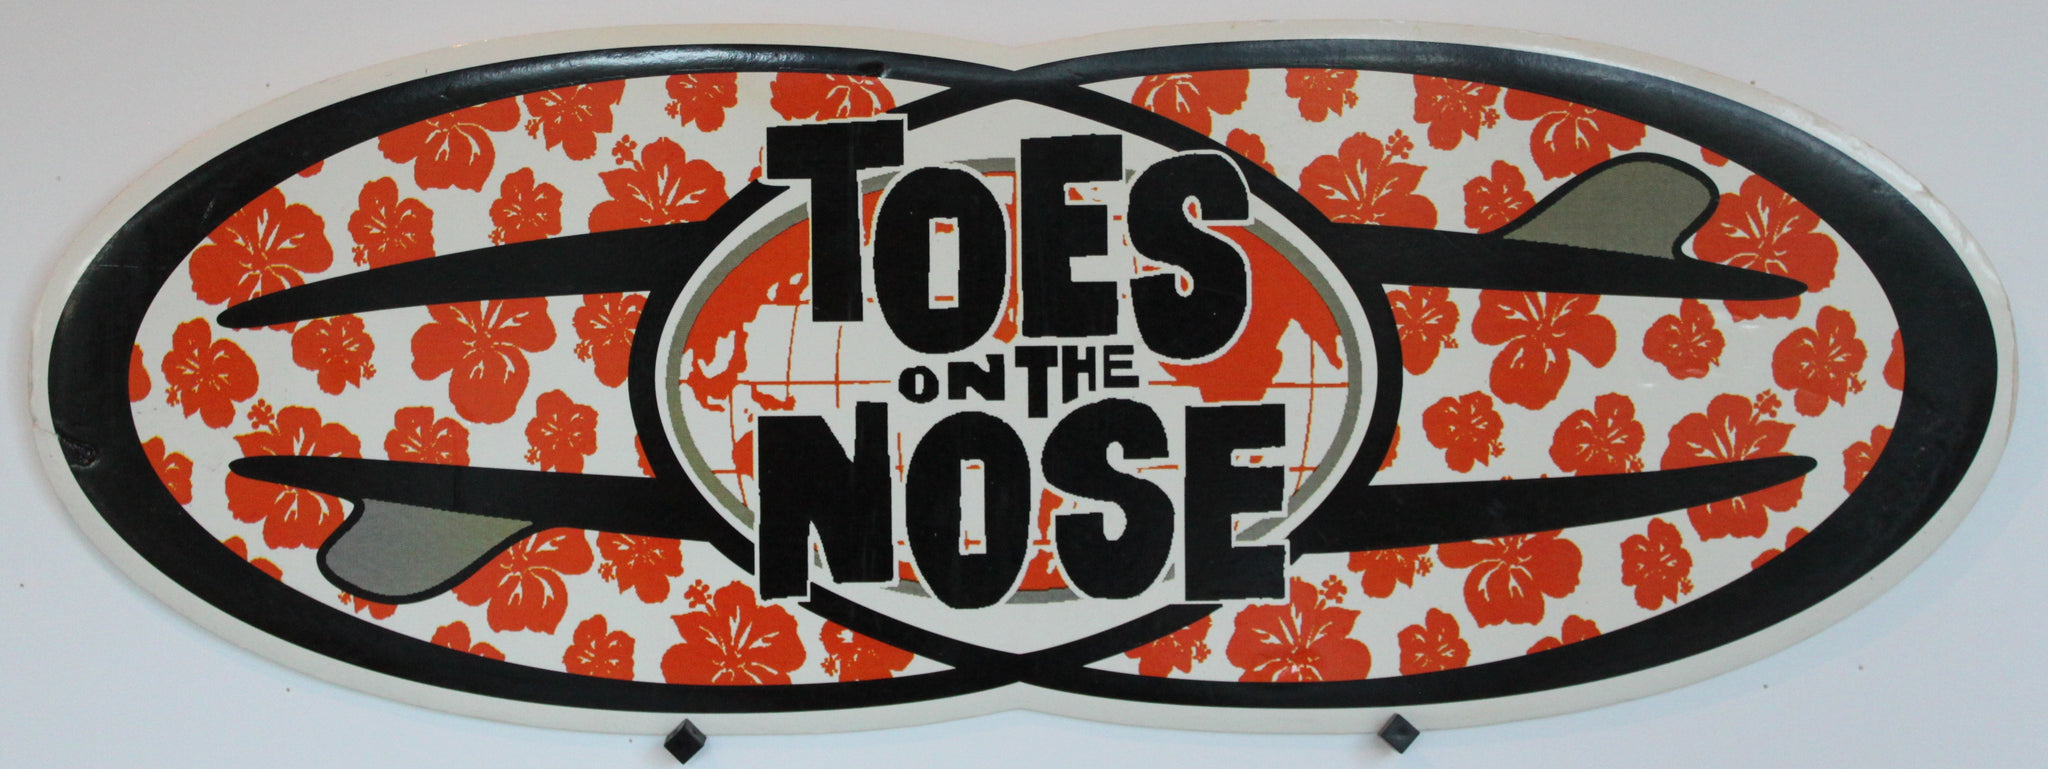 Toes on the Noe promo card. c1999.